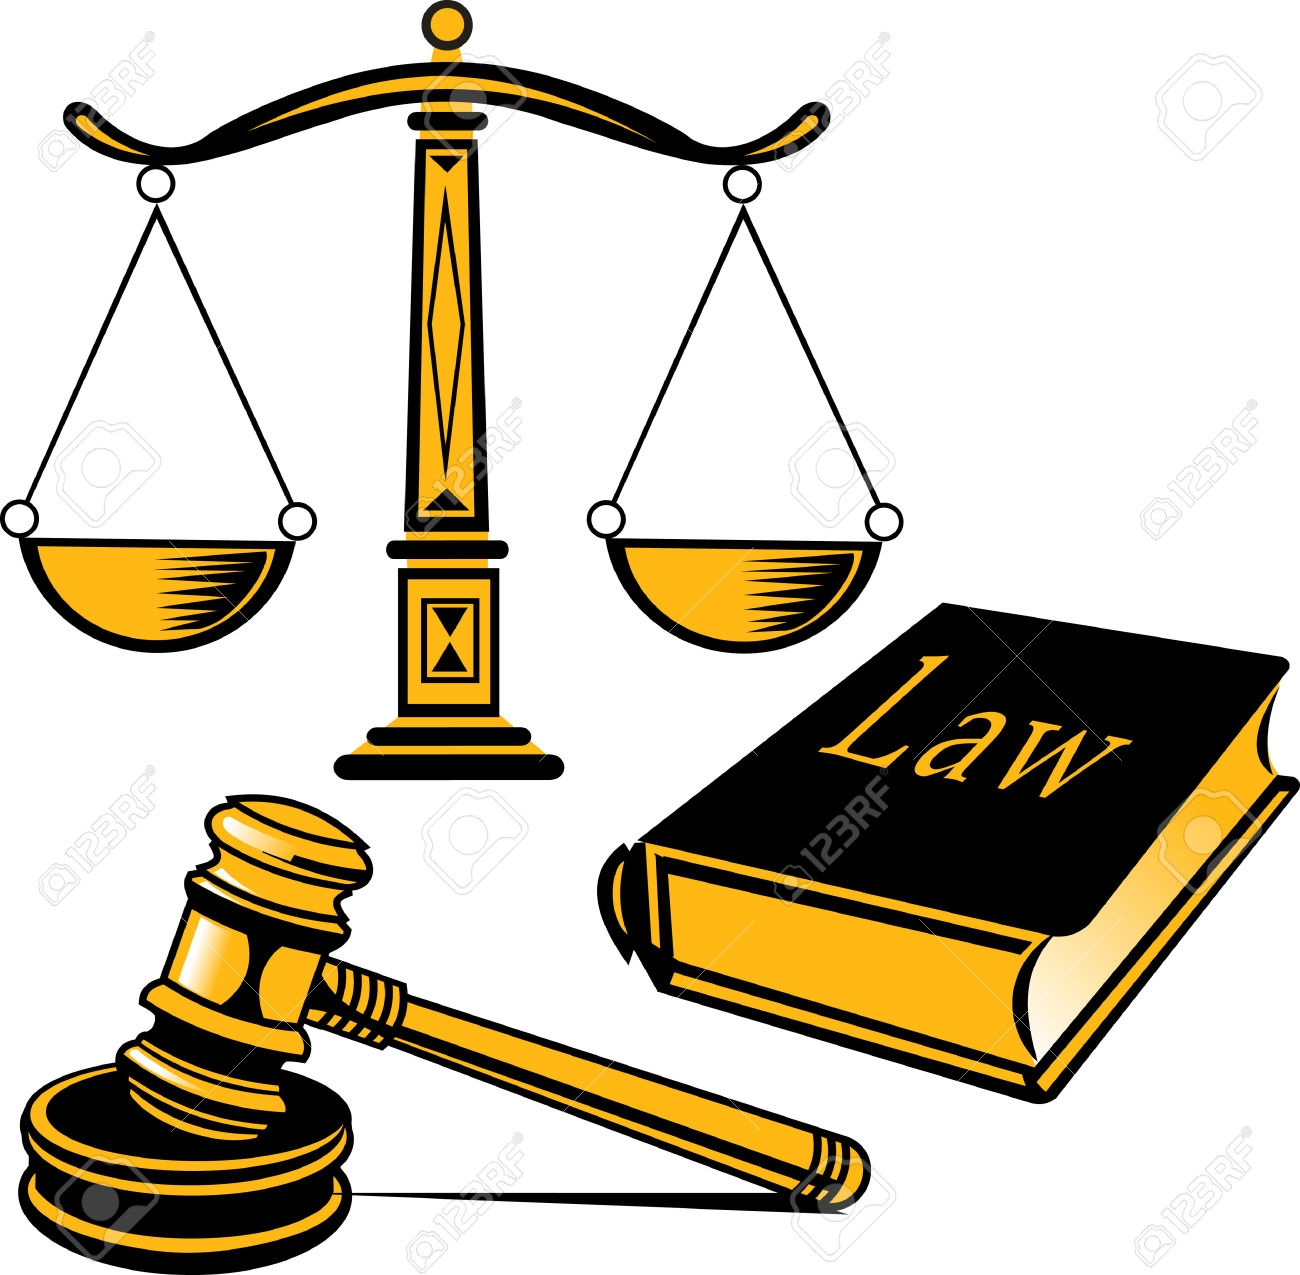 law clipart